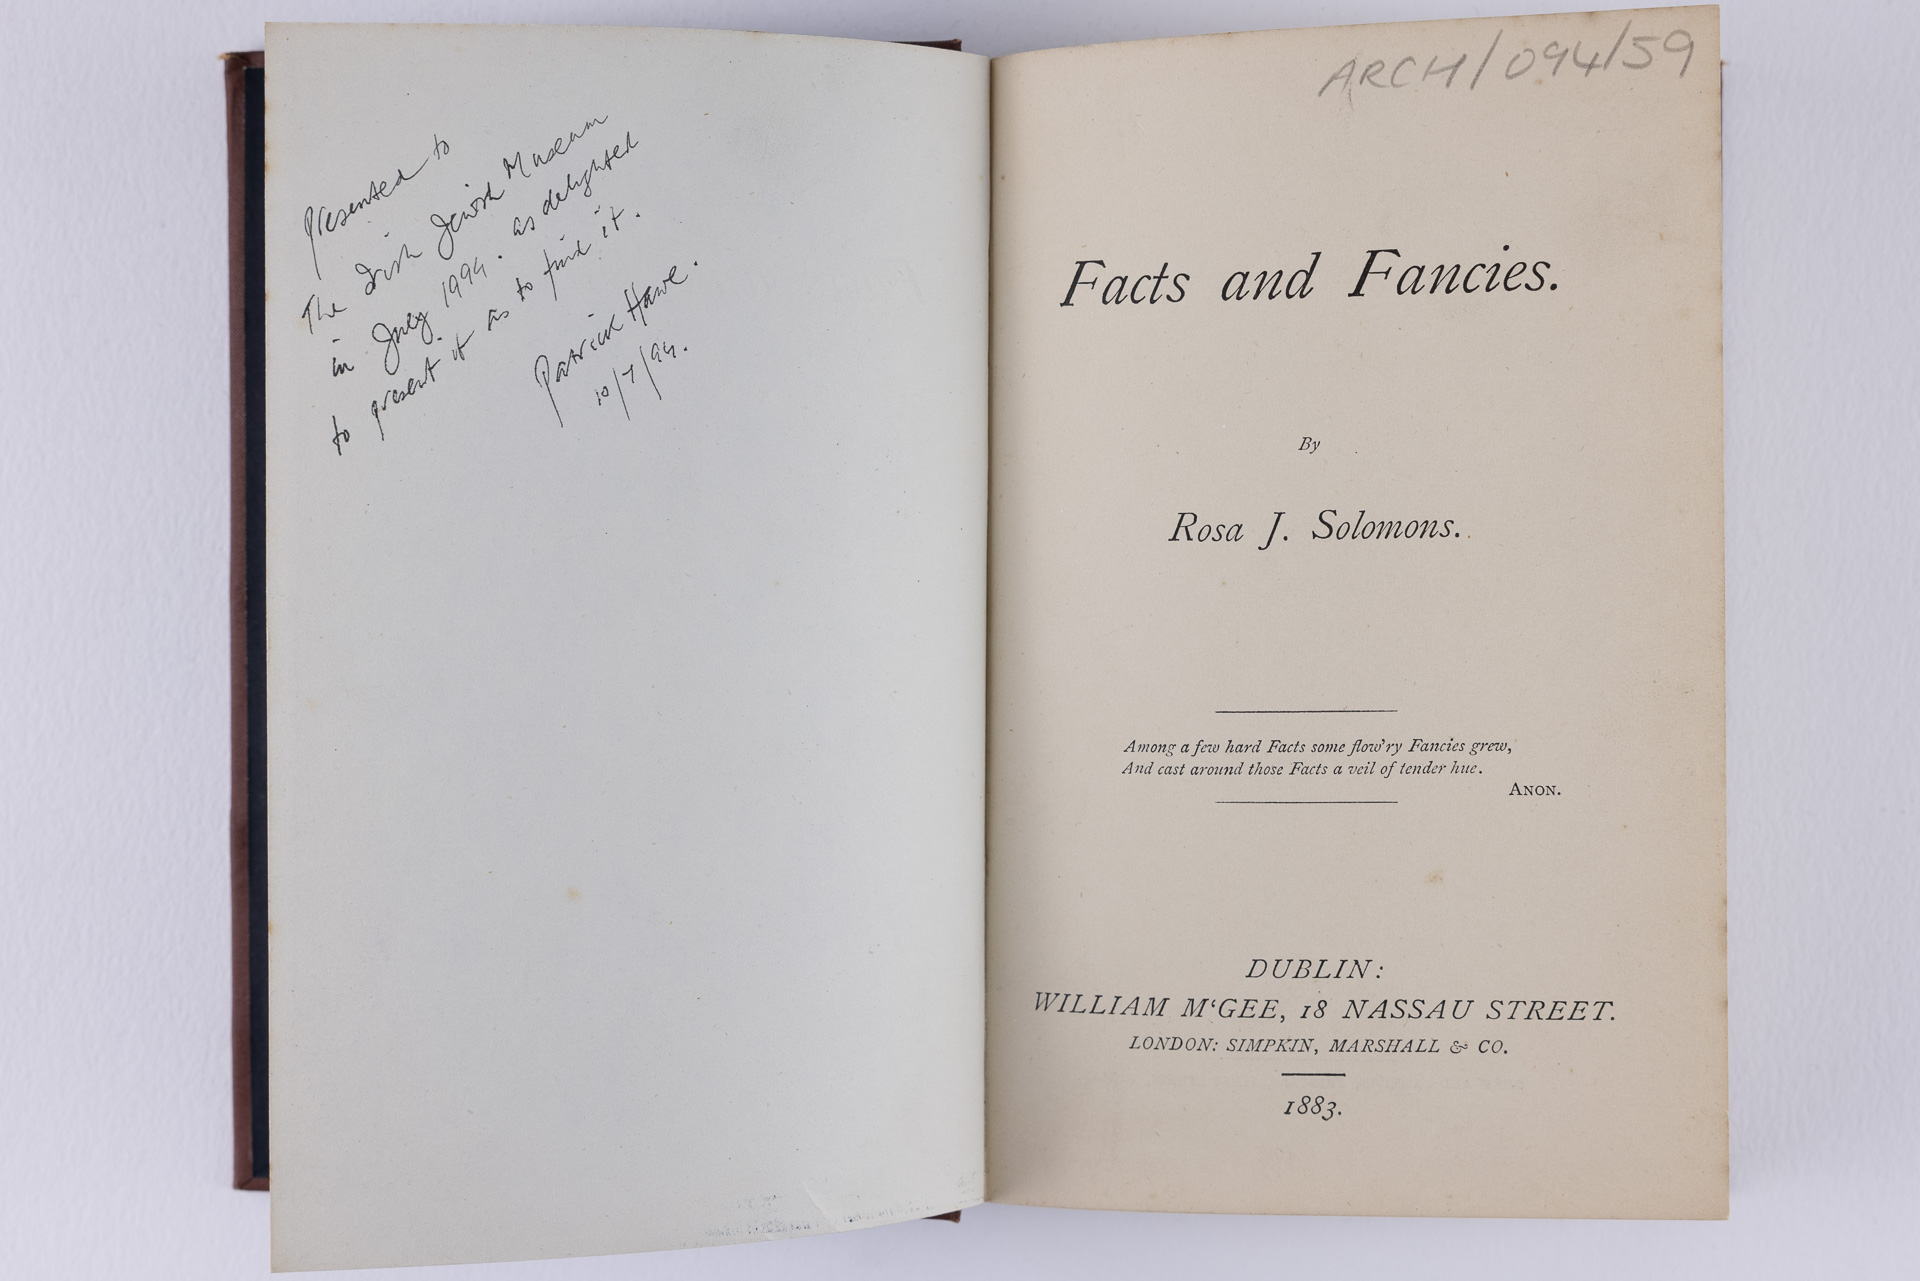 Facts and Fancies - title page - Rosa Solomons